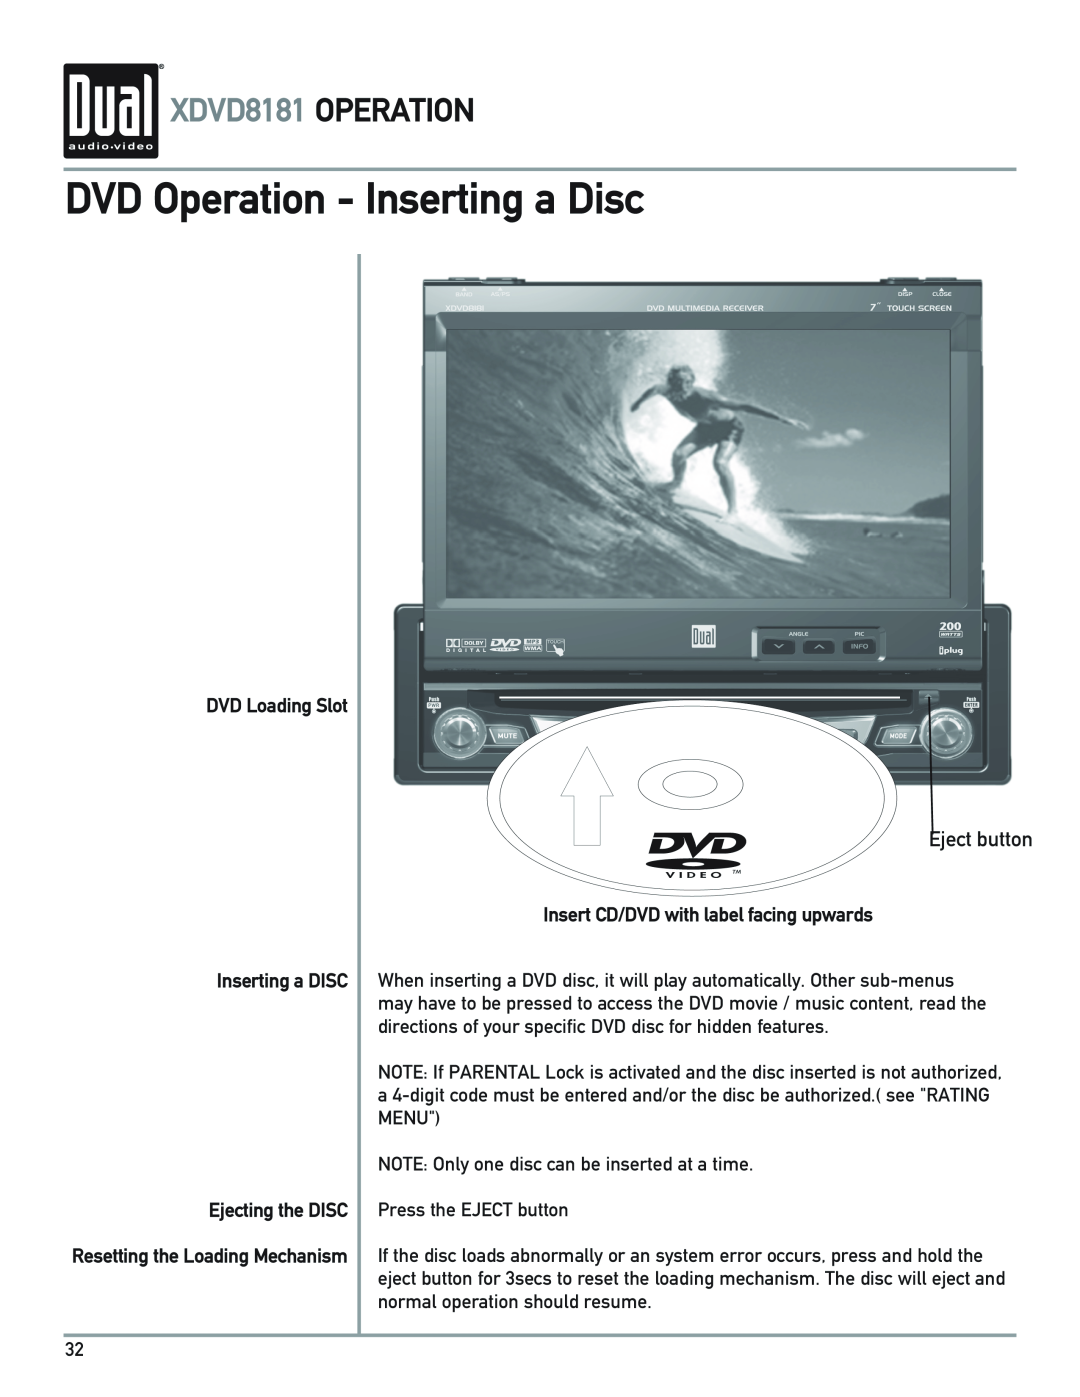 Dual owner manual DVD Operation - Inserting a Disc, XDVD8181 OPERATION, Eject button, DVD Loading Slot Inserting a DISC 